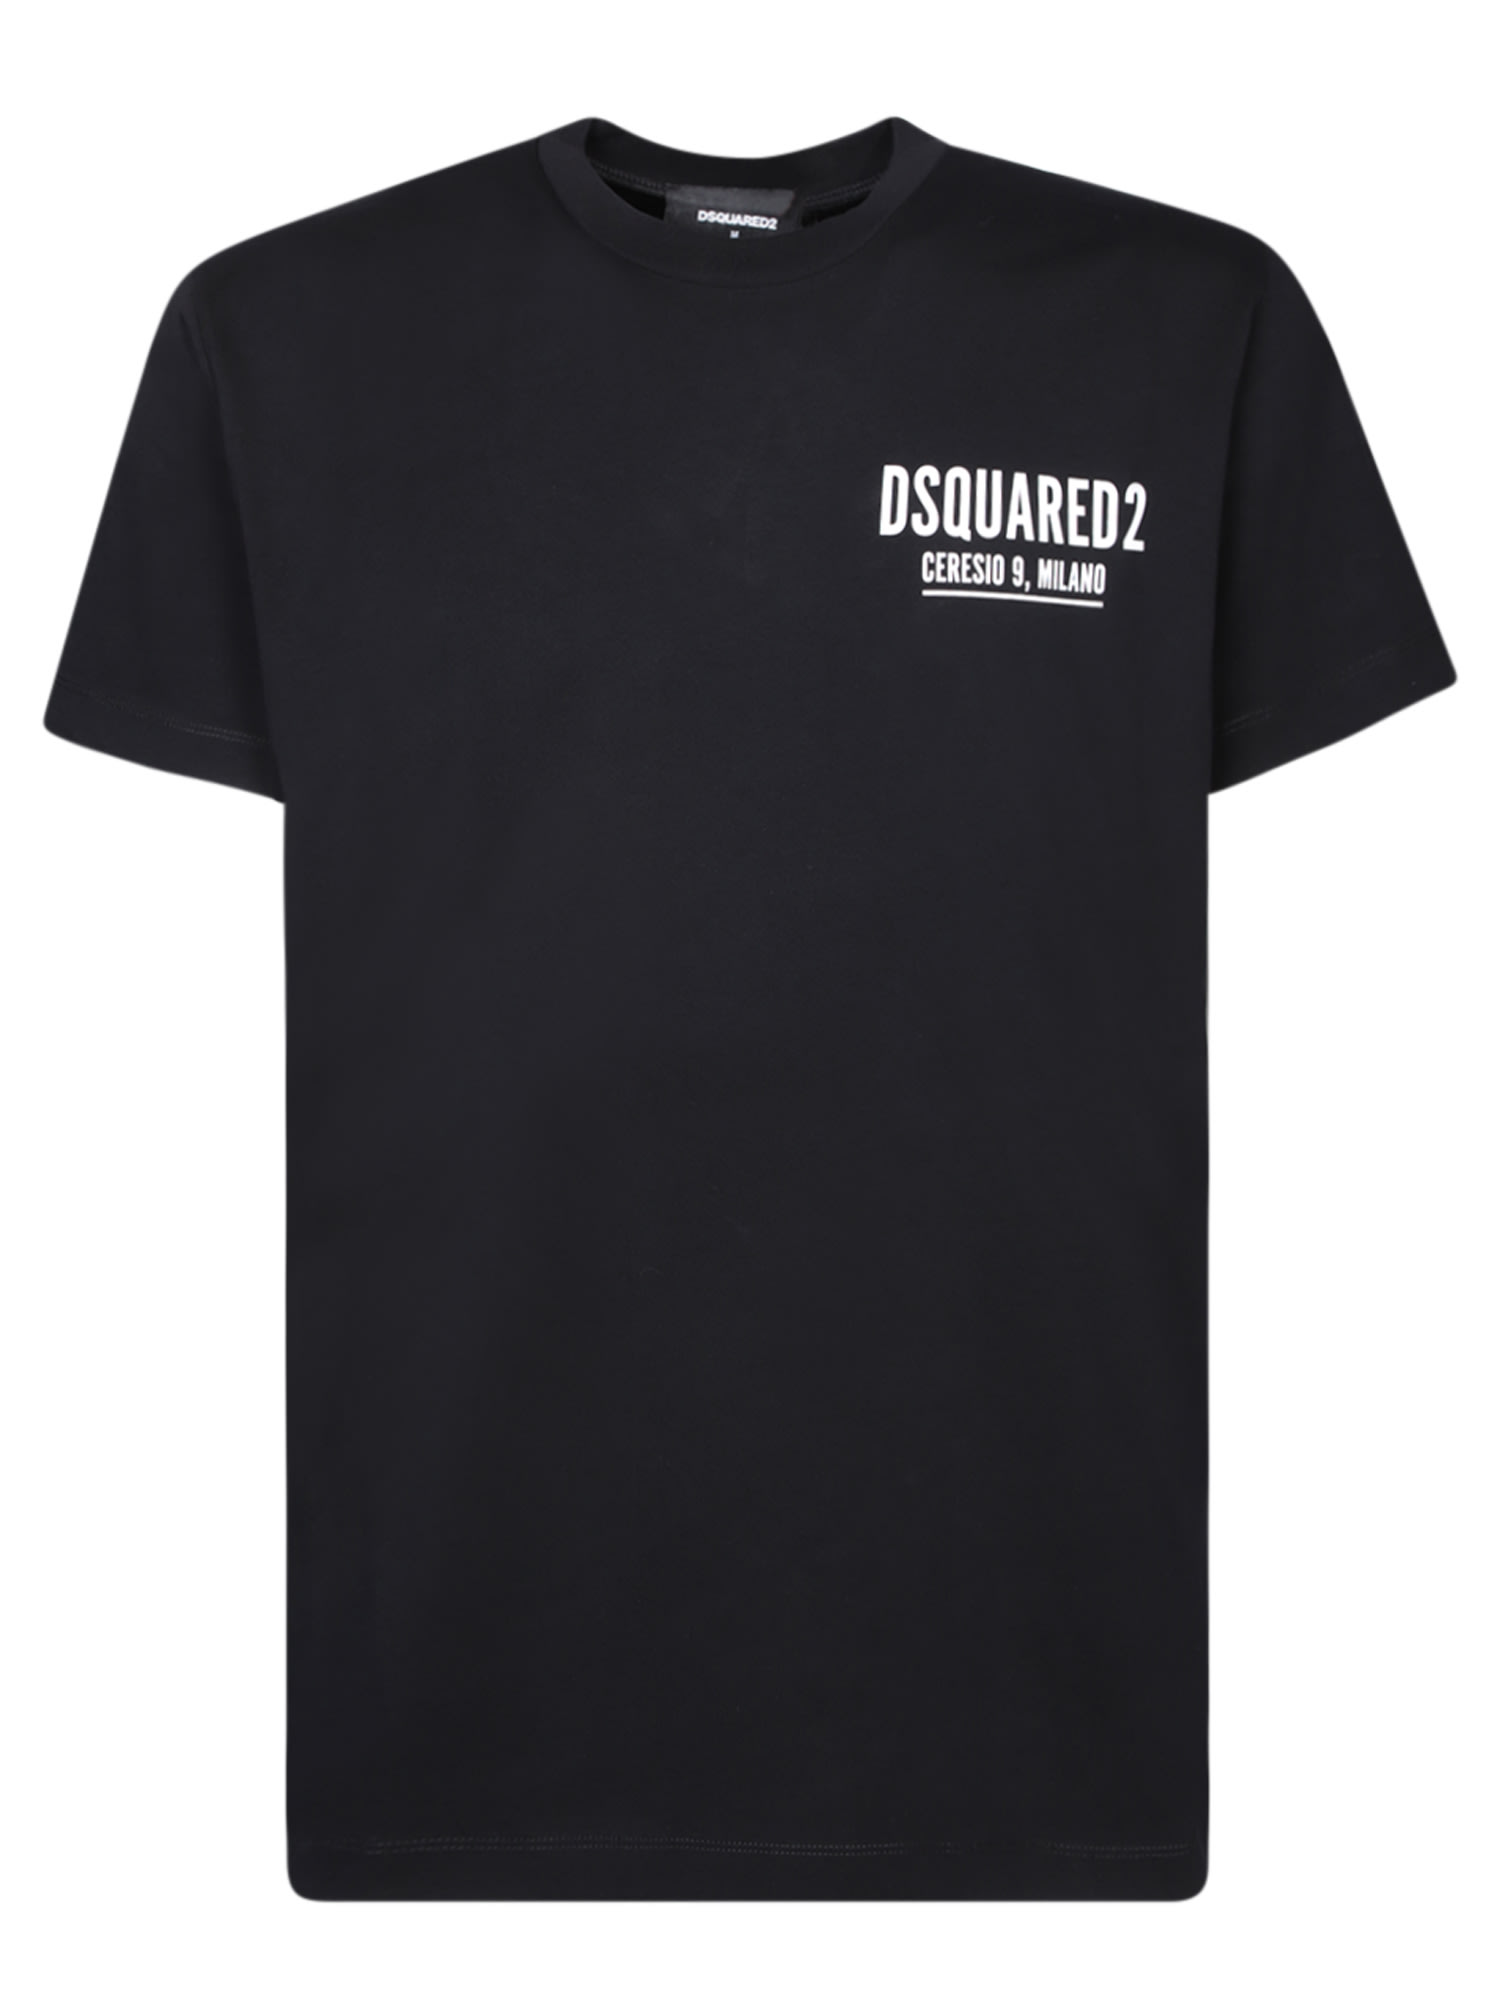 Shop Dsquared2 Ceresio 9 Cool Black T-shirt